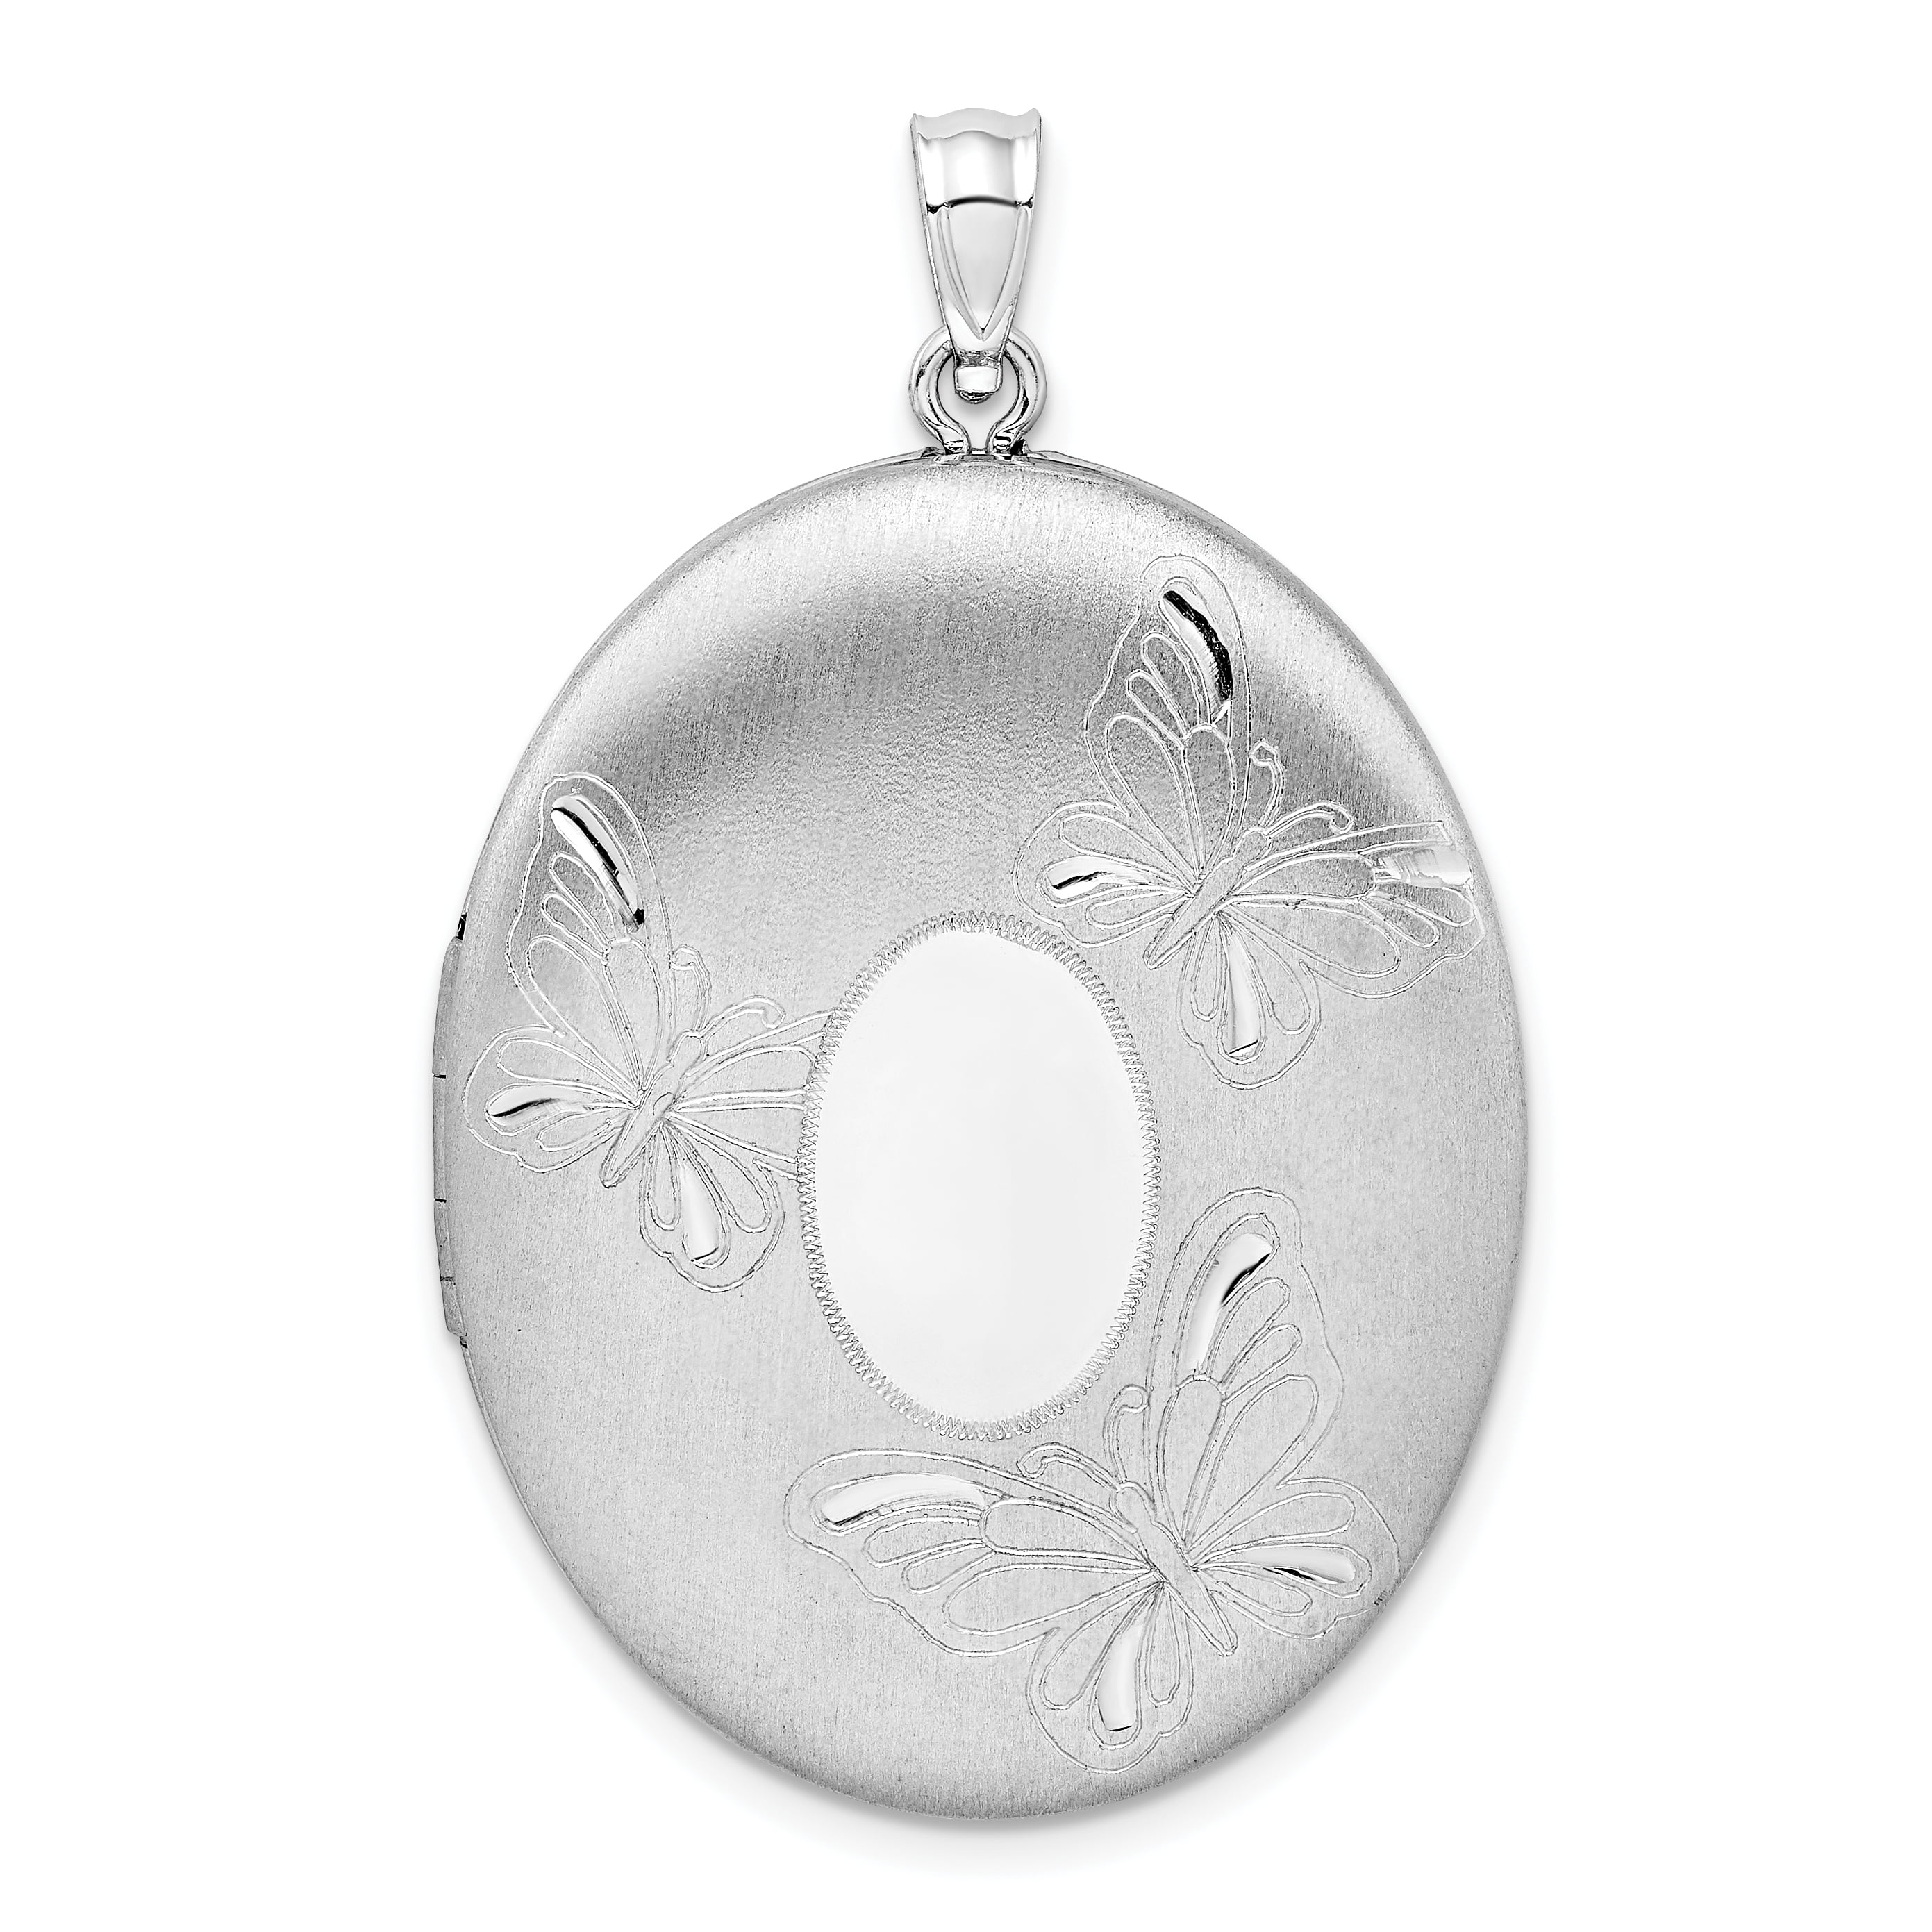 925 Sterling Silver Oval Cross Religious Photo Pendant Charm Locket Chain Necklace That Holds Pictures Fine Jewelry Gifts For Women For Her 